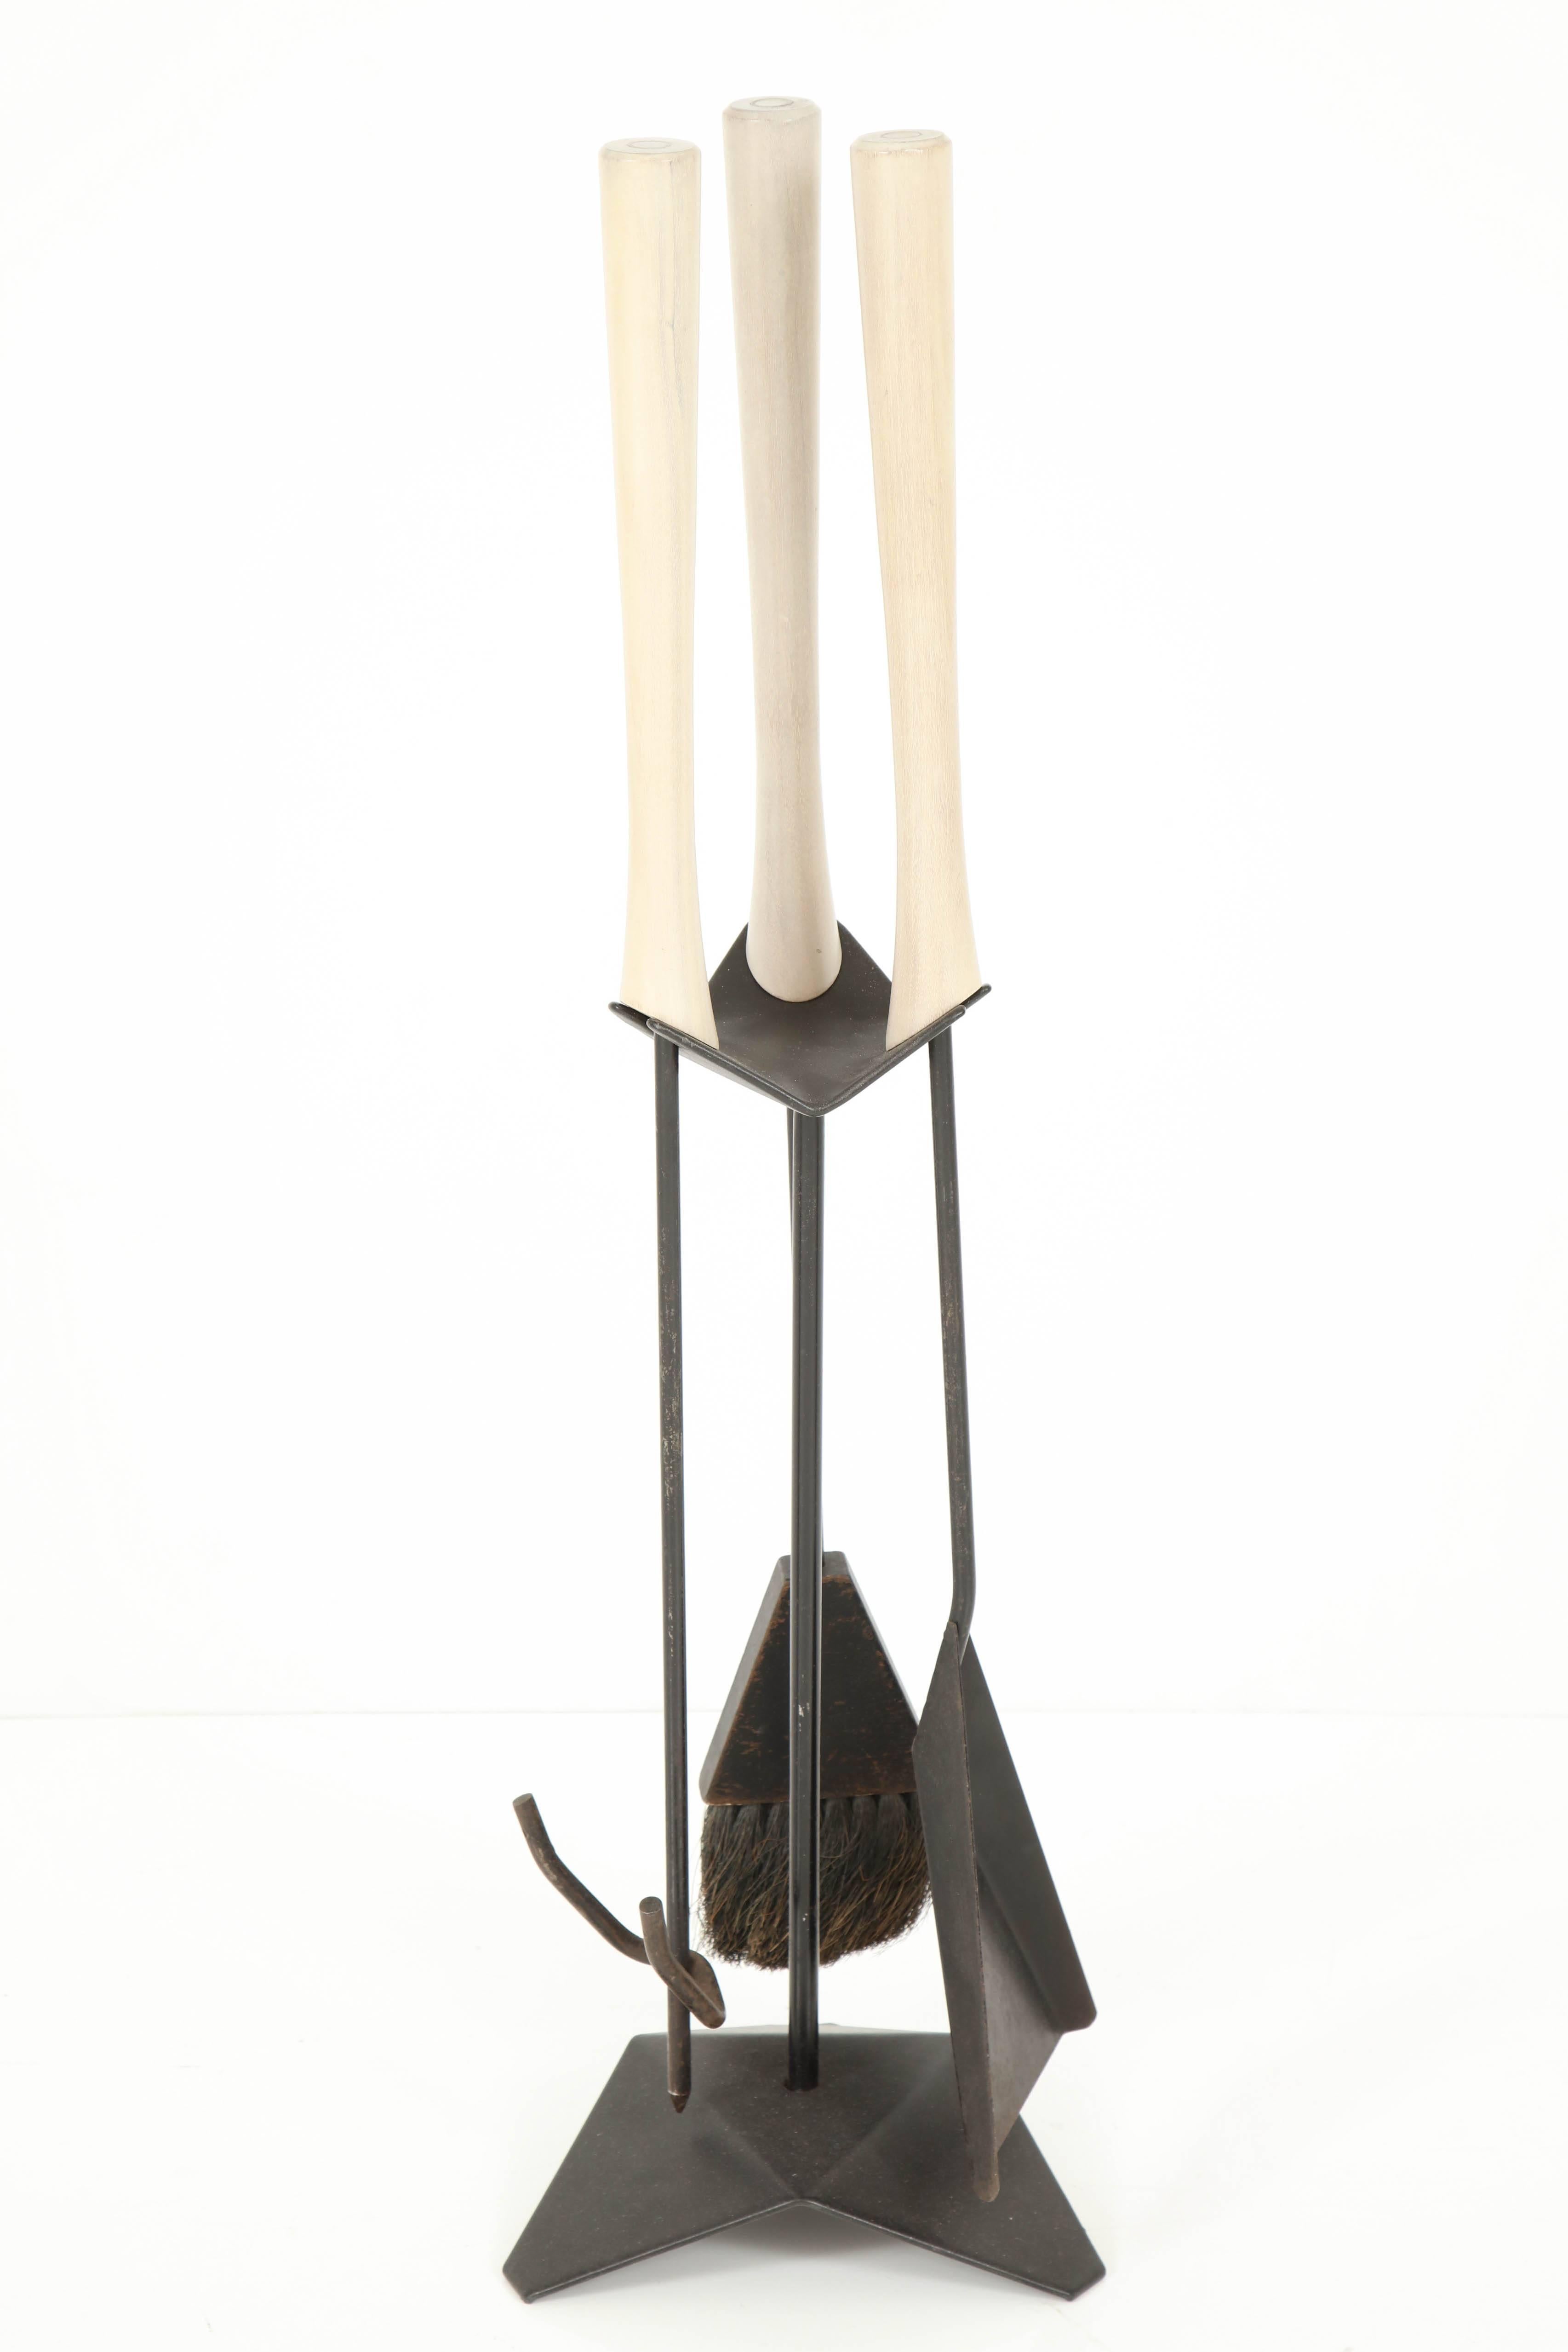 Modernist Fireplace Tools 1